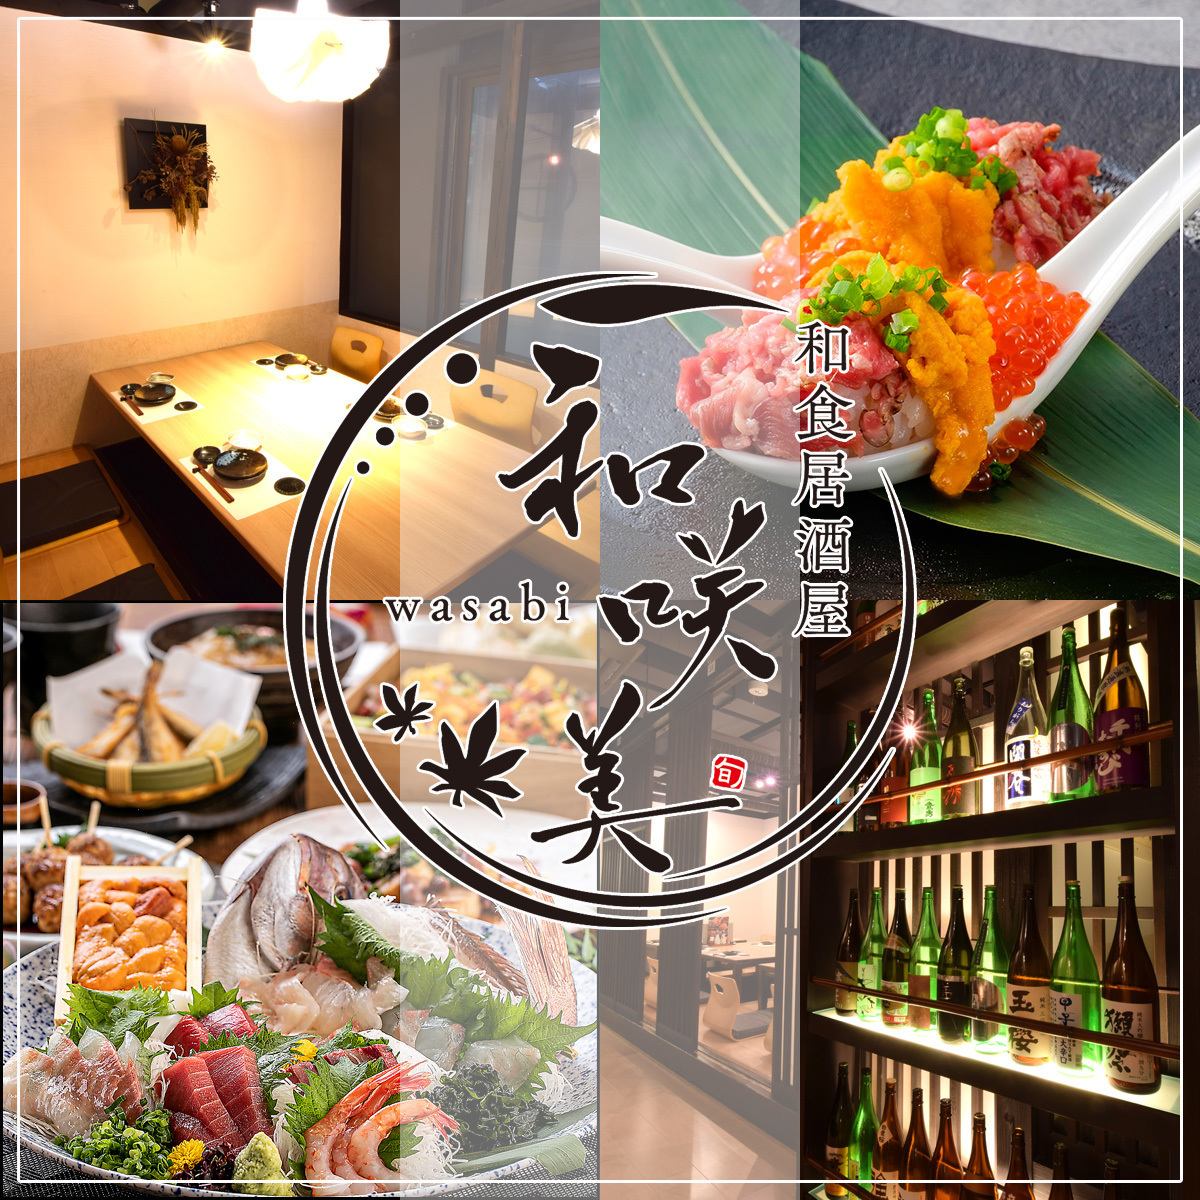 About a 3-minute walk from the exit of JR Yonago Station! An izakaya with private rooms for adults!